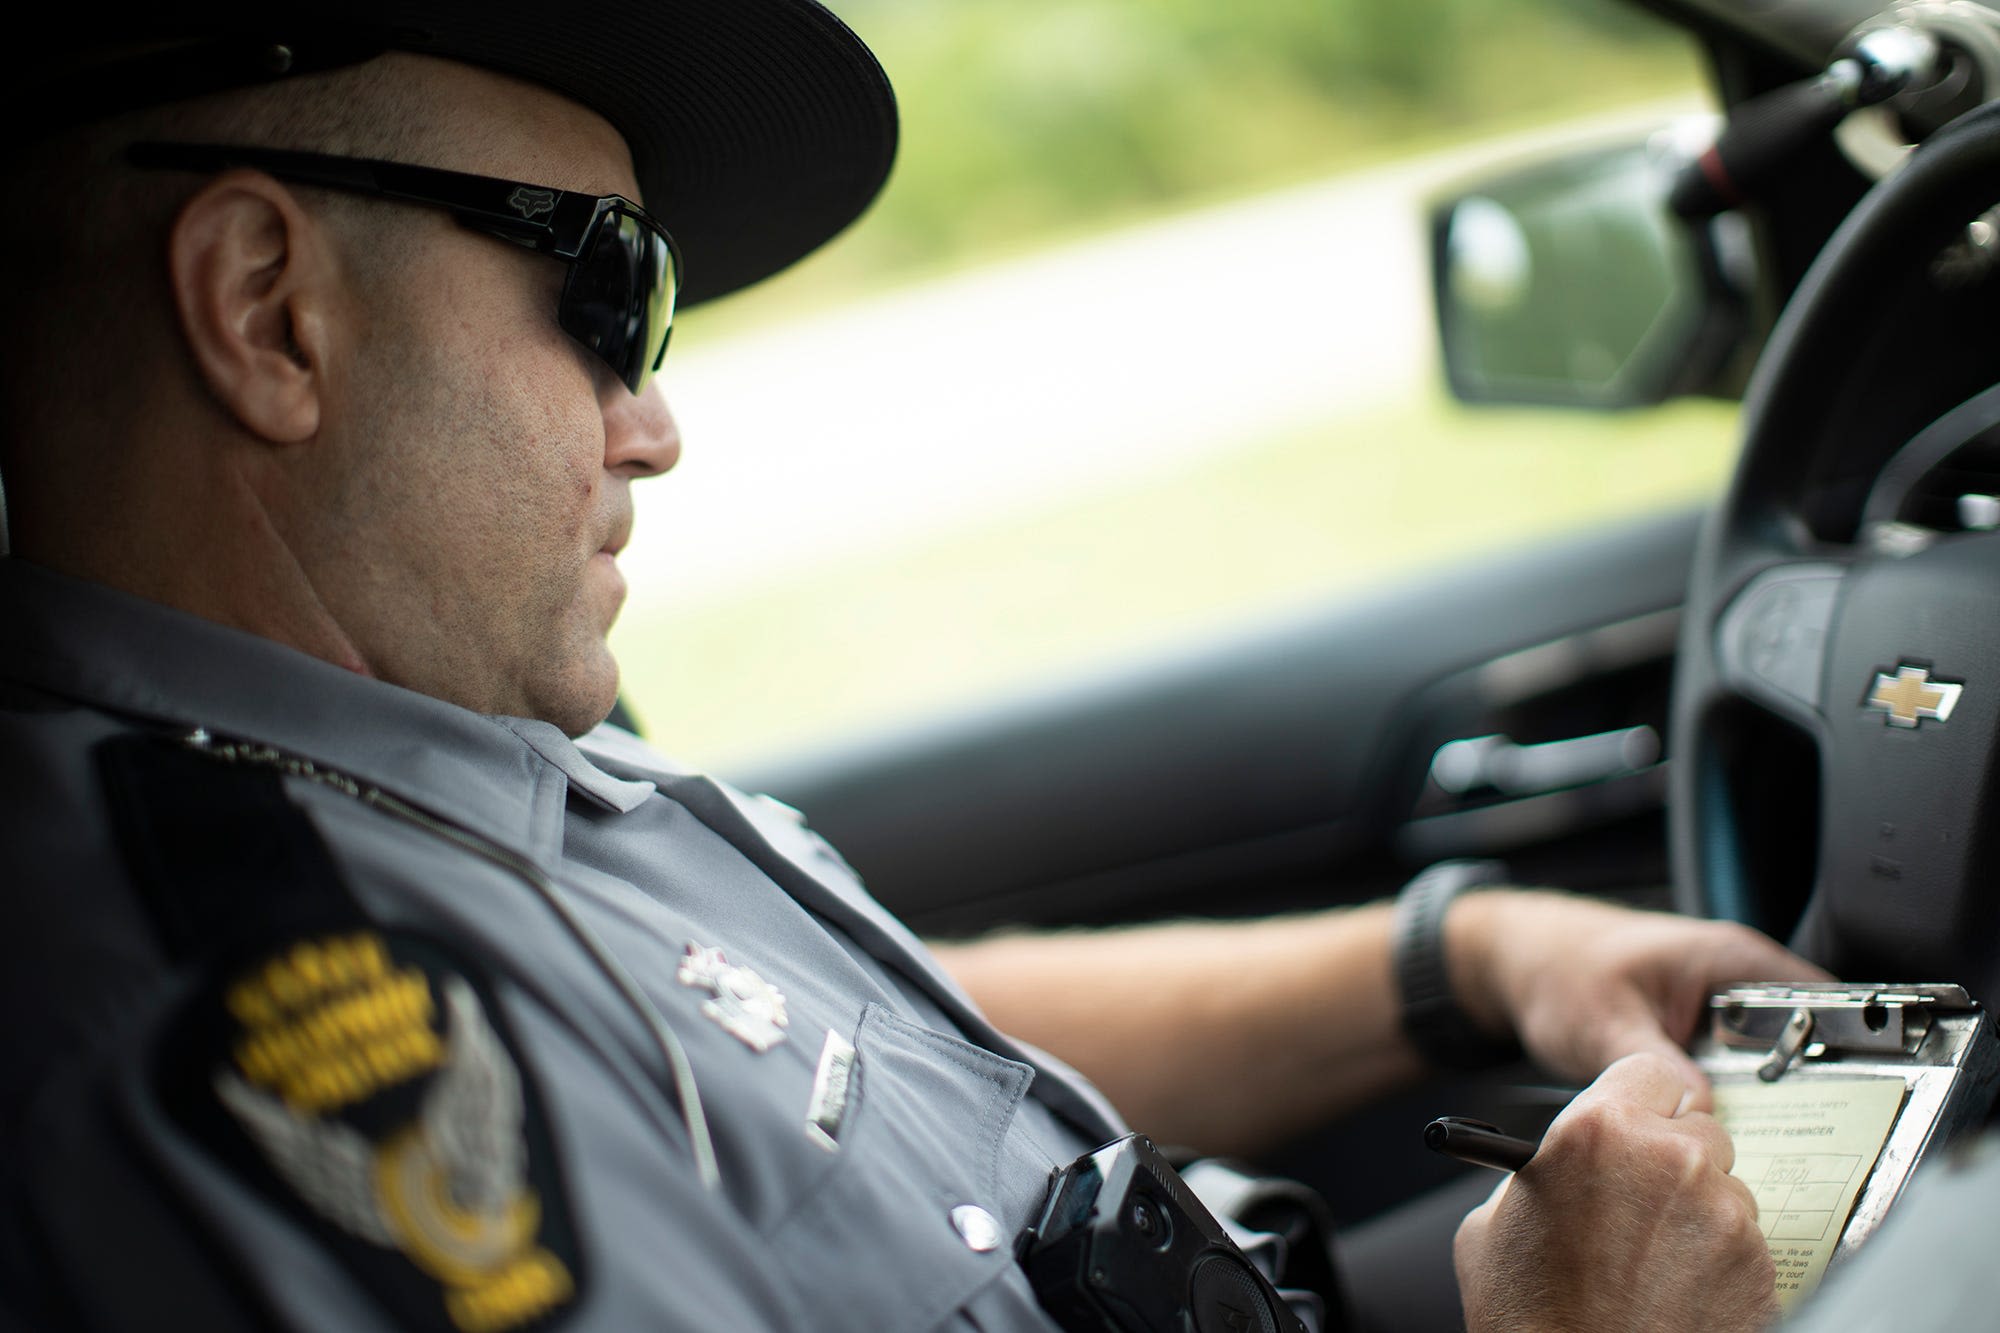 You could get pulled over for not wearing a seat belt in Ohio if new bill becomes law